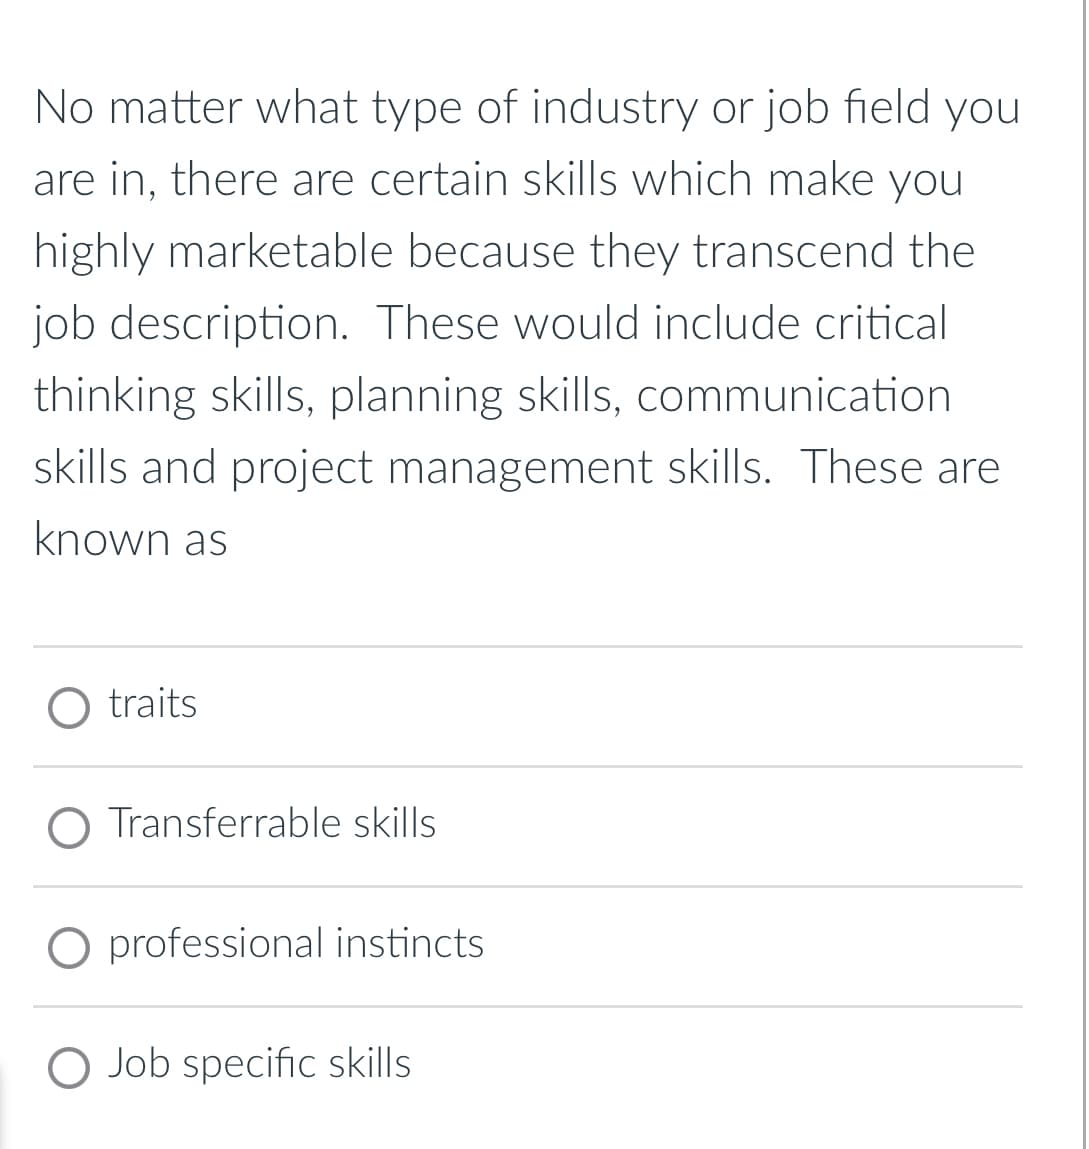 No matter what type of industry or job field you
are in, there are certain skills which make you
highly marketable because they transcend the
job description. These would include critical
thinking skills, planning skills, communication
skills and project management skills. These are
known as
O traits
O Transferrable skills
O professional instincts
O Job specific skills